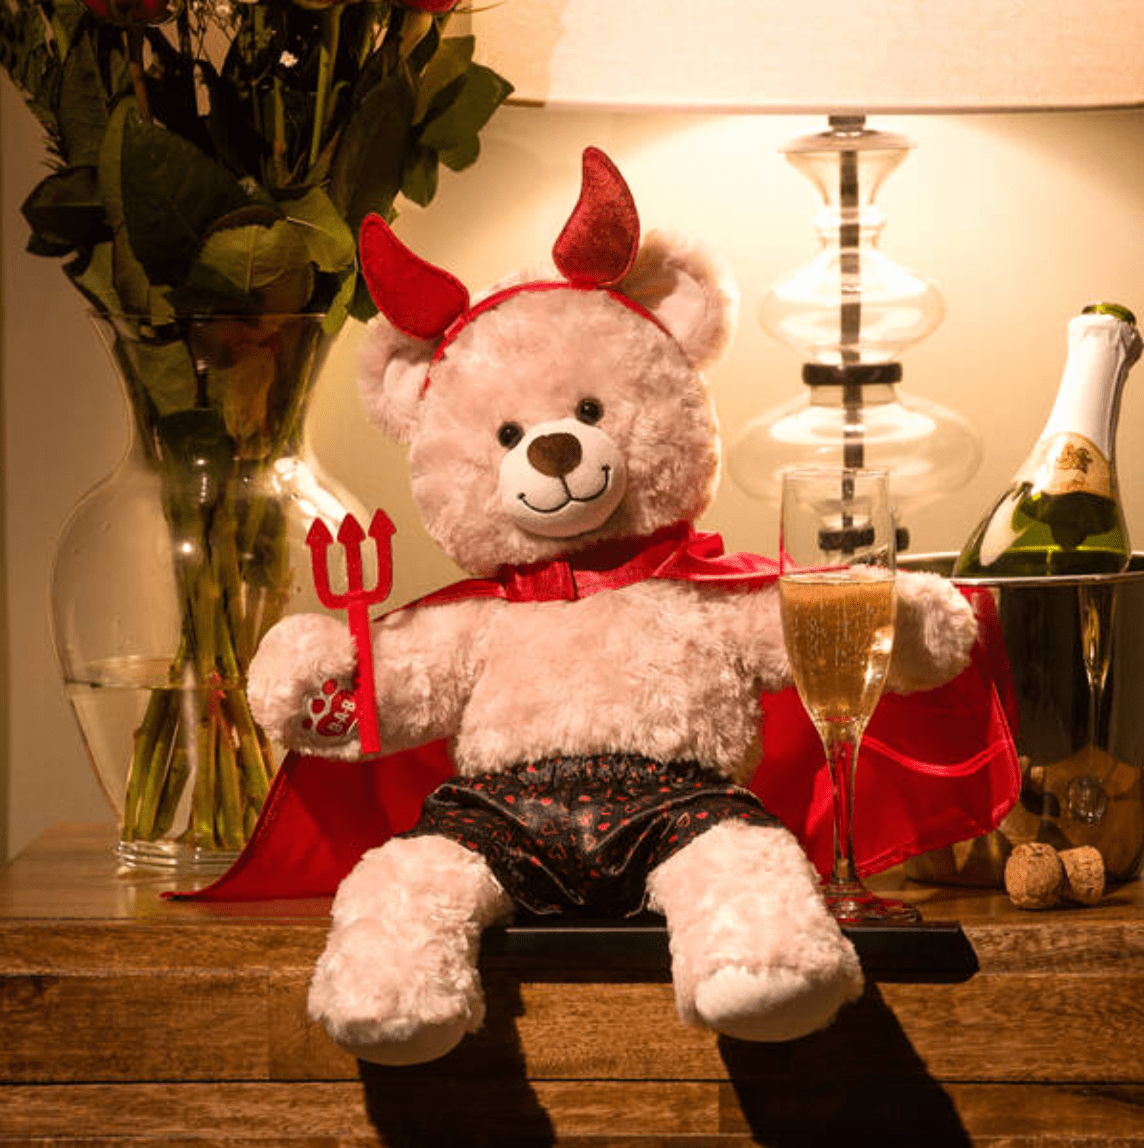 A teddy bear wearing devil horns, a cape, and satin boxers, sitting next to a glass of real champagne.